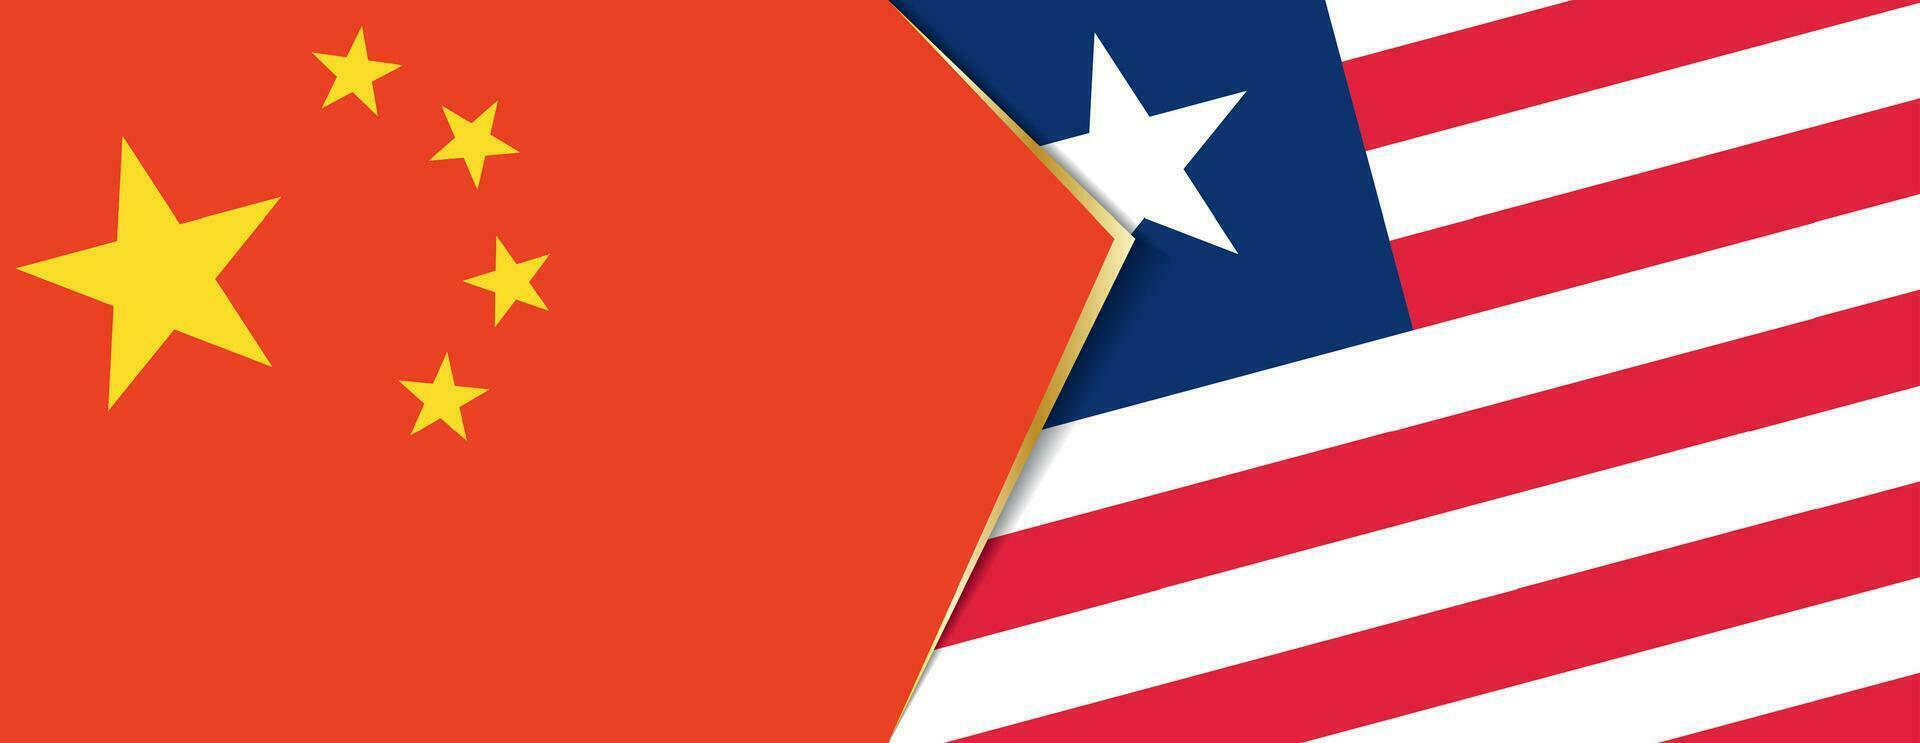 China and Liberia flags, two vector flags.